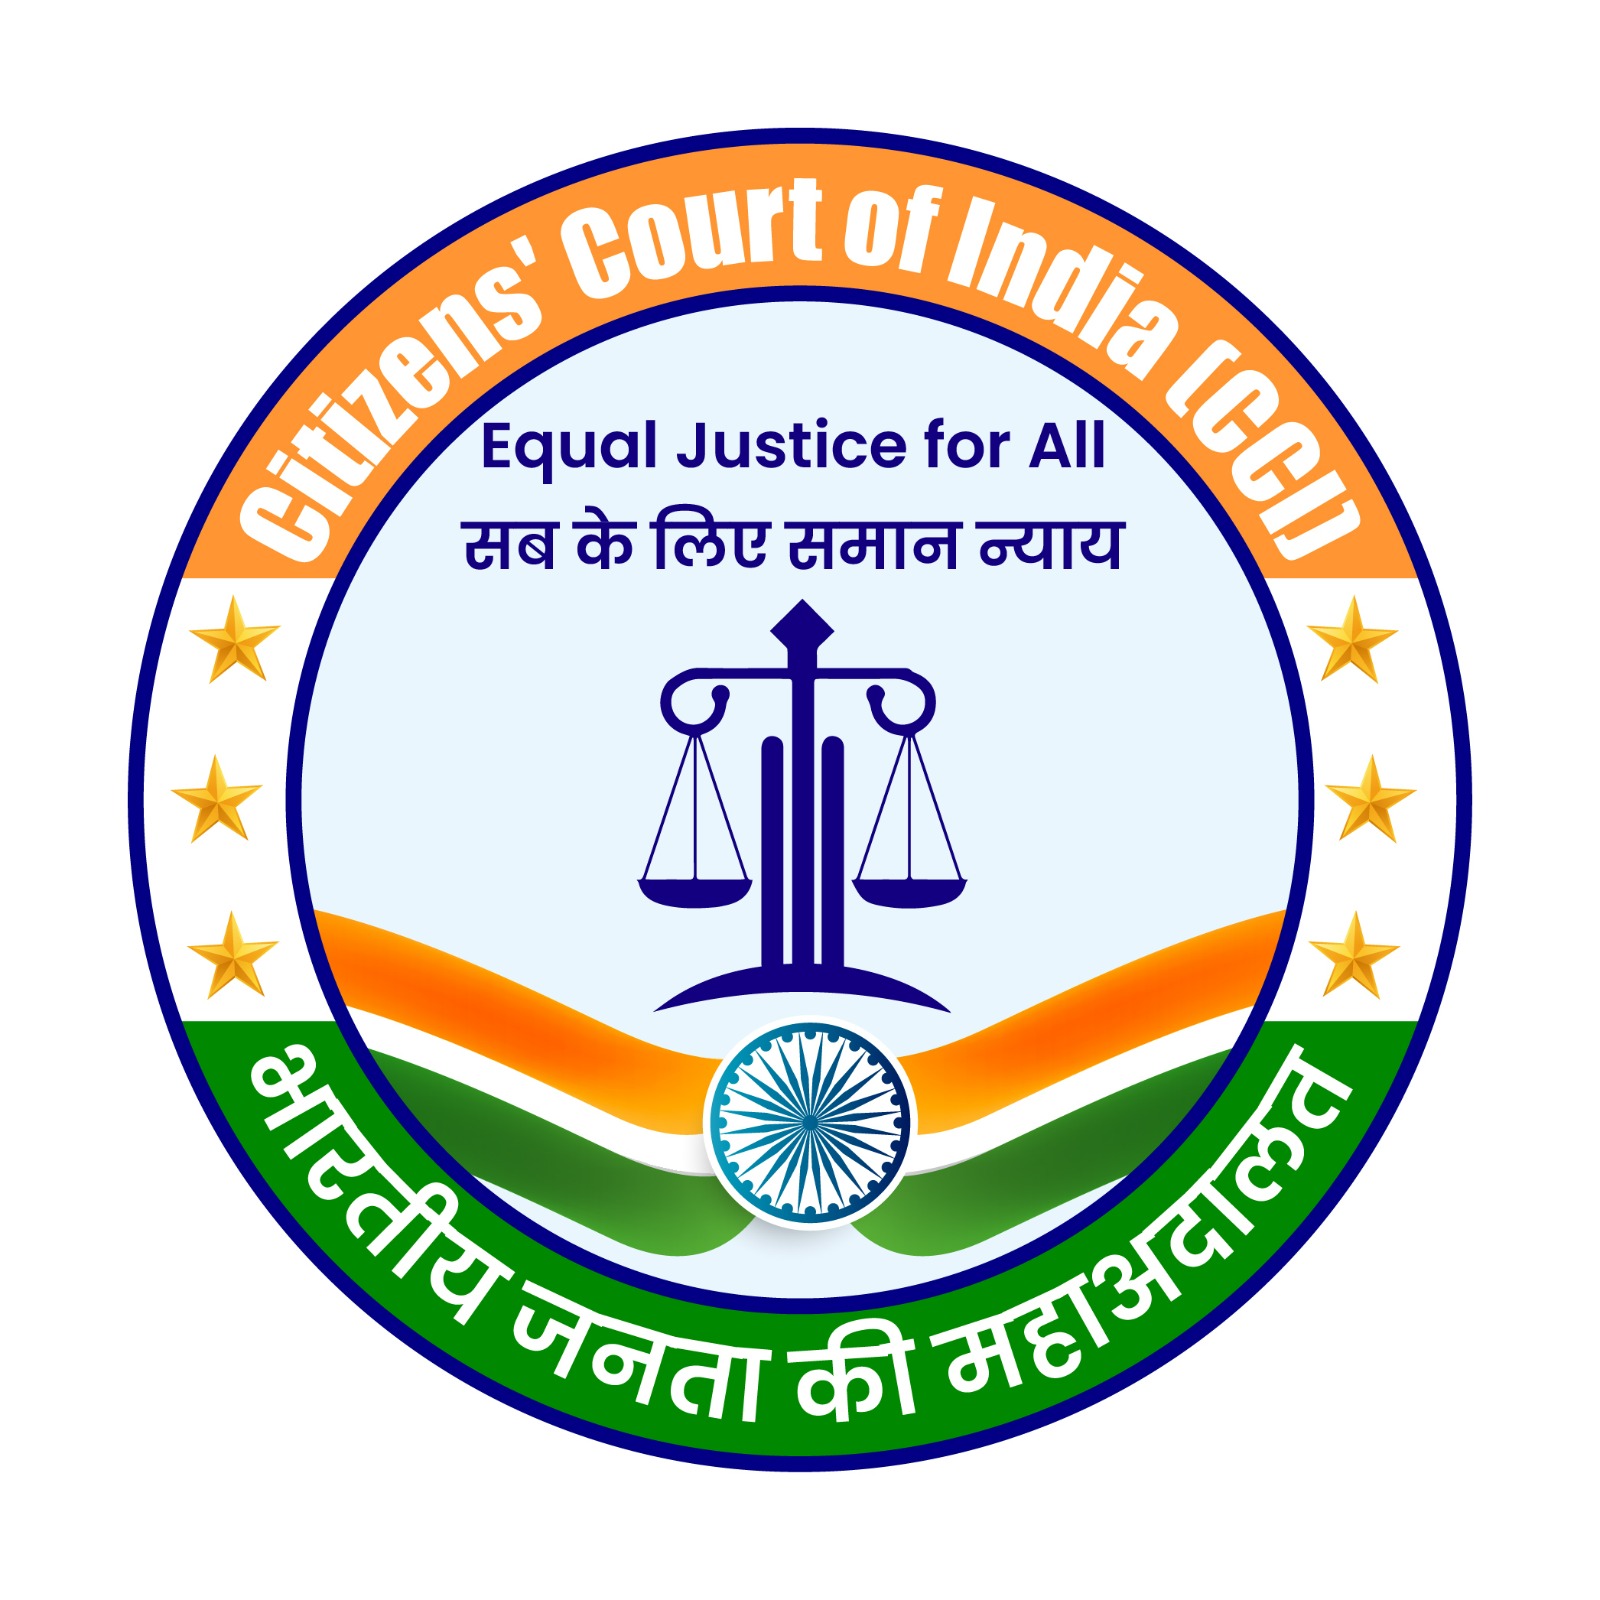 [Citizens’ Court of India] The first public hearing of “Bhartiya Janta Ki Maha Adalat” will be held on 16th to 17th of September, 2023. In this public hearing three pivotal cases will be addressed and resolved.